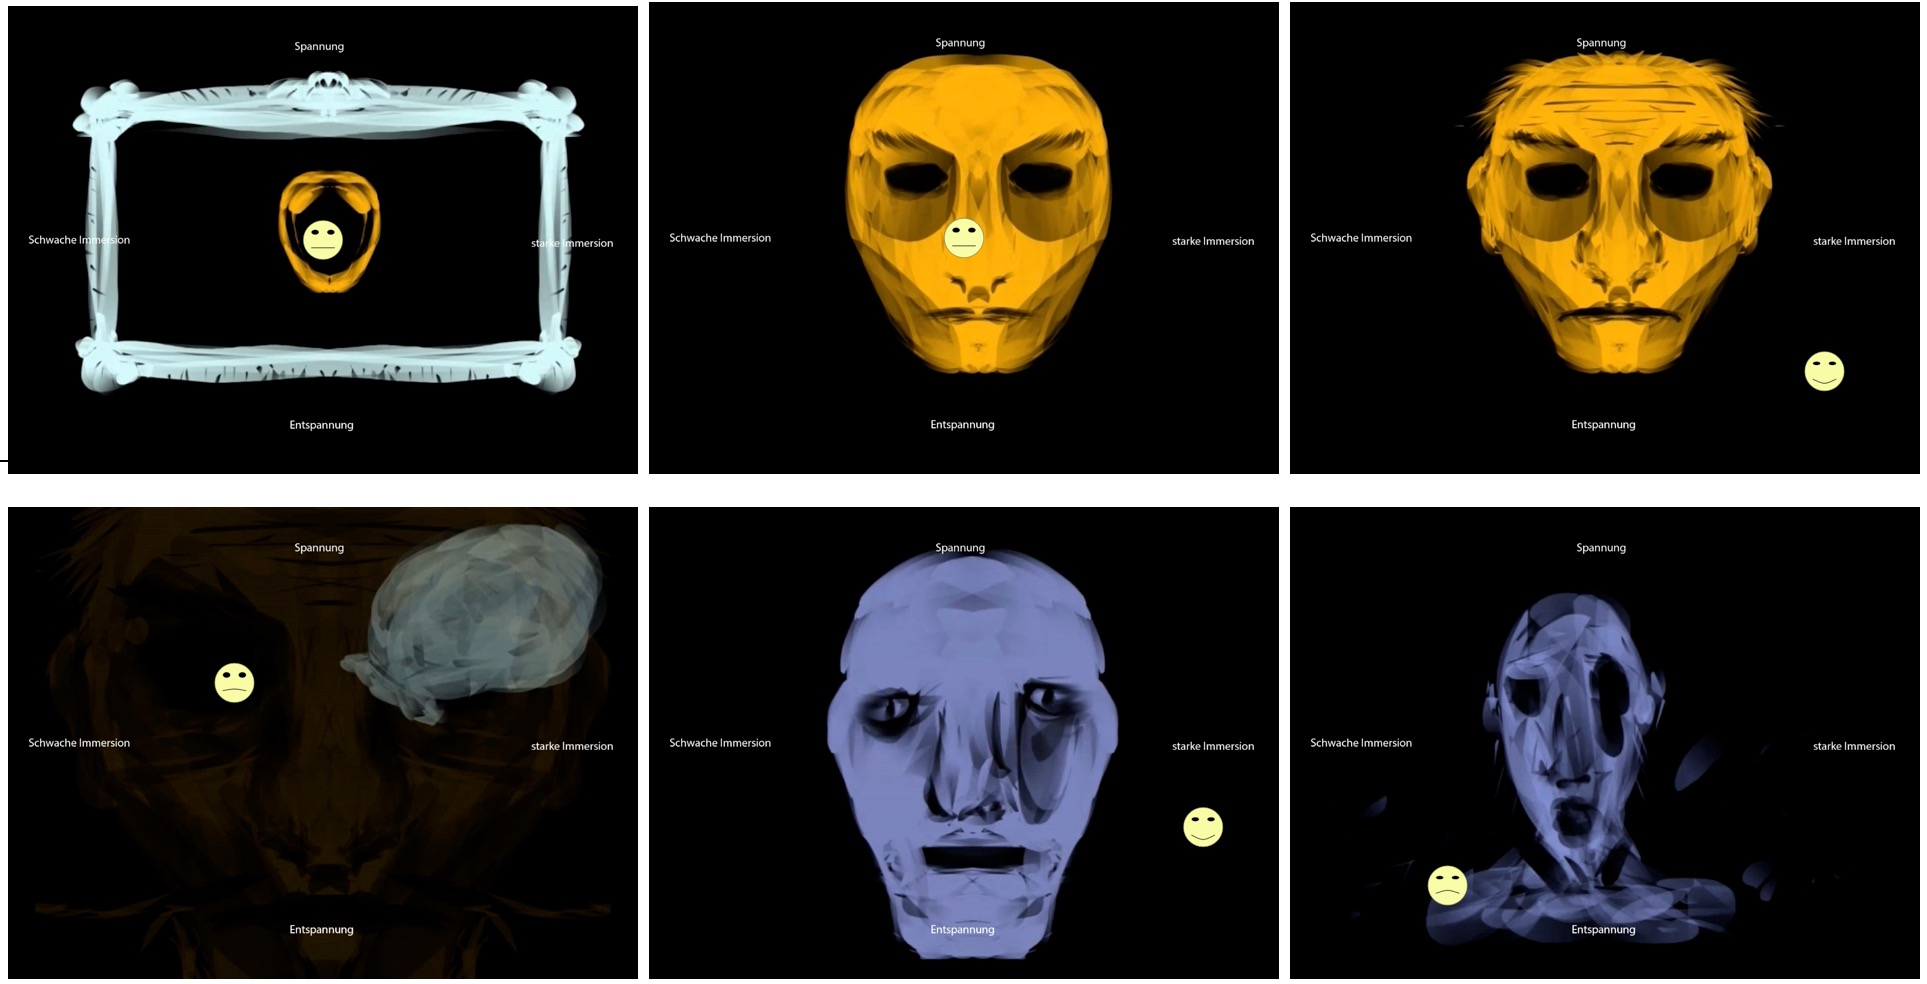 6 frames of an animated film with a yellow face and blue face on a black background. More description above and below.